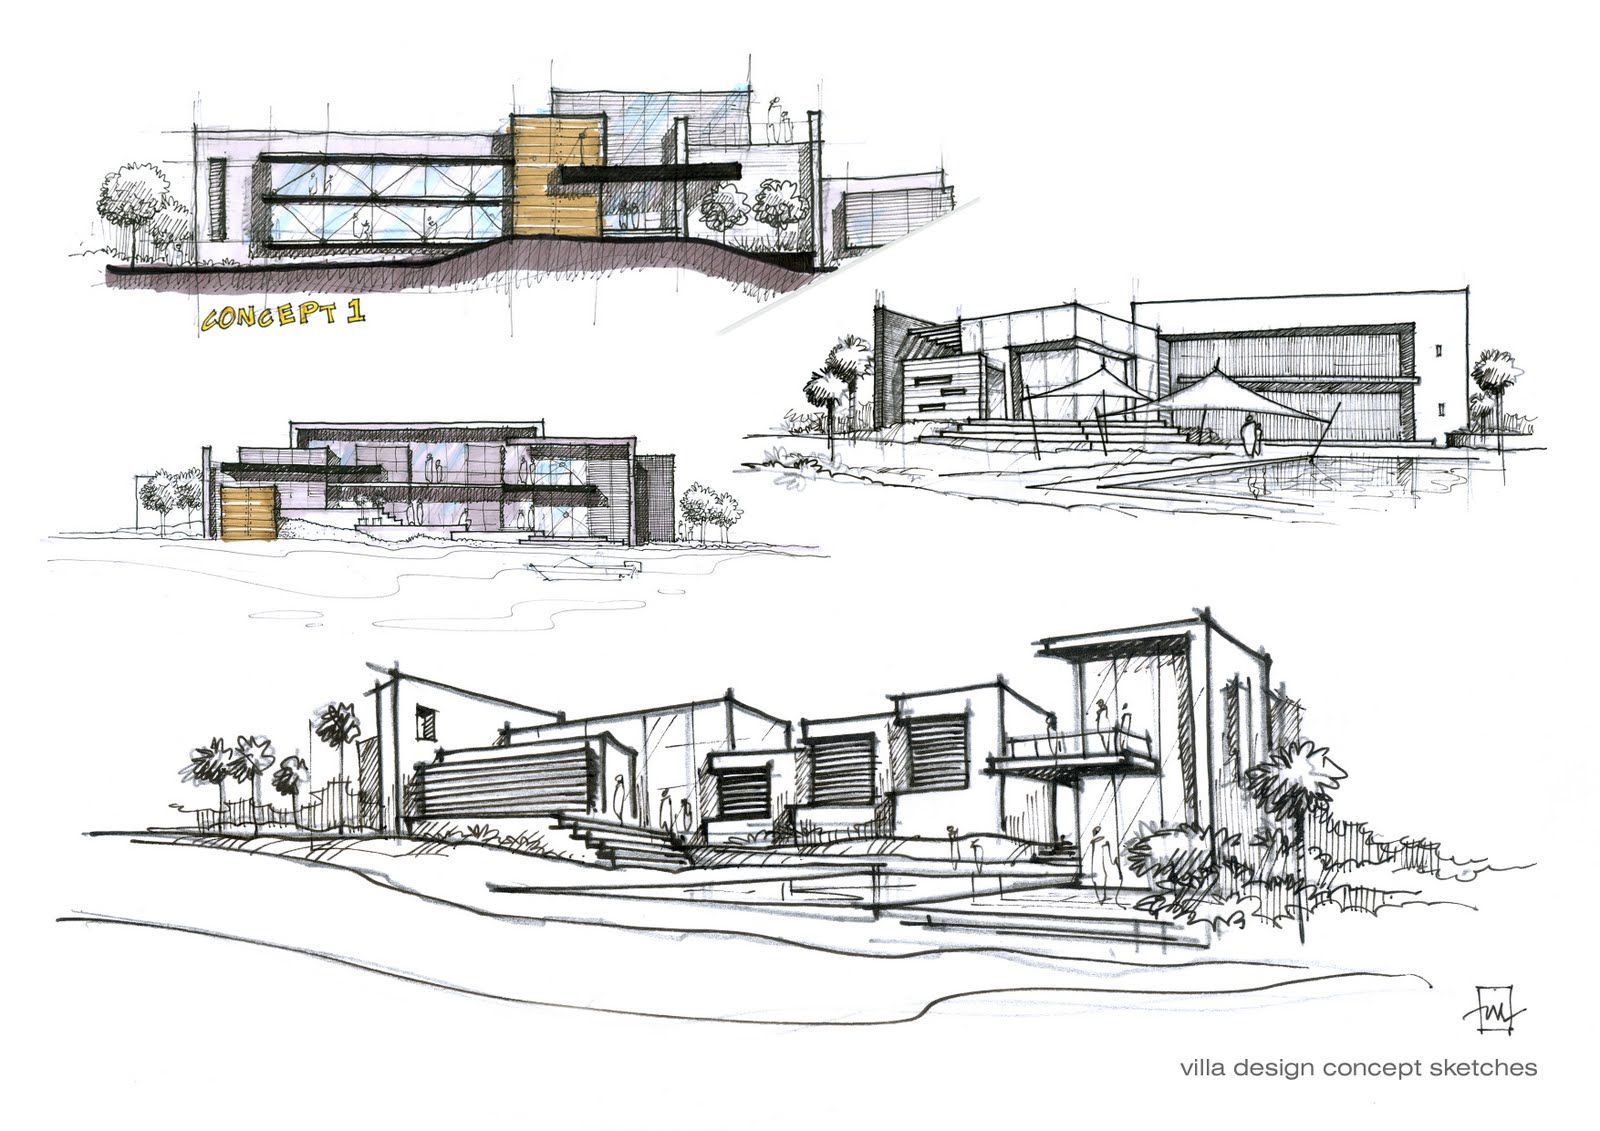 presentation drawing in architecture